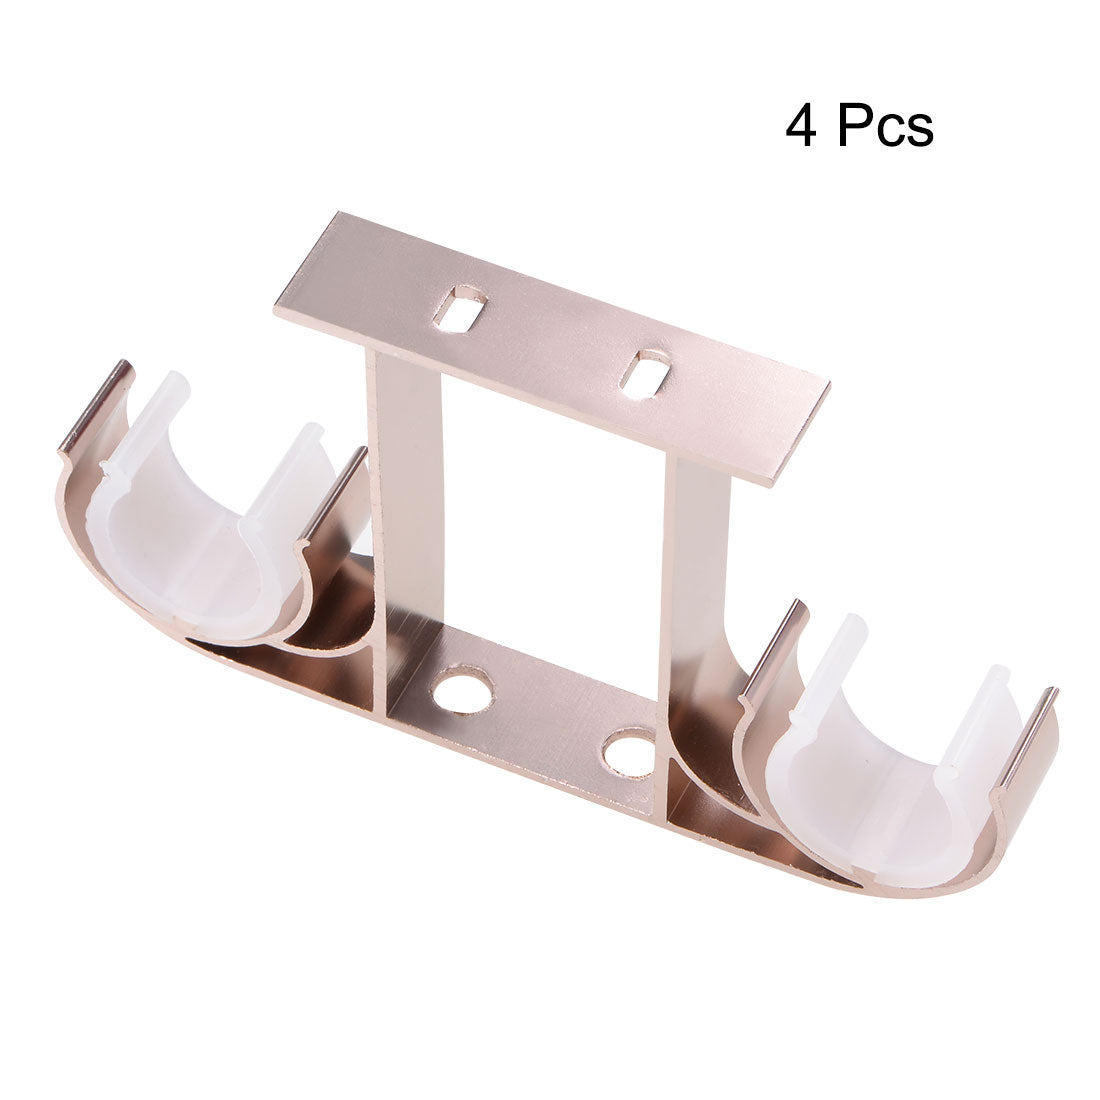 uxcell Uxcell Curtain Rod Bracket Aluminum Alloy Double Holder Support for 24mm Drapery Rod, 141 x 80 x 19mm Rose Gold 4Pcs